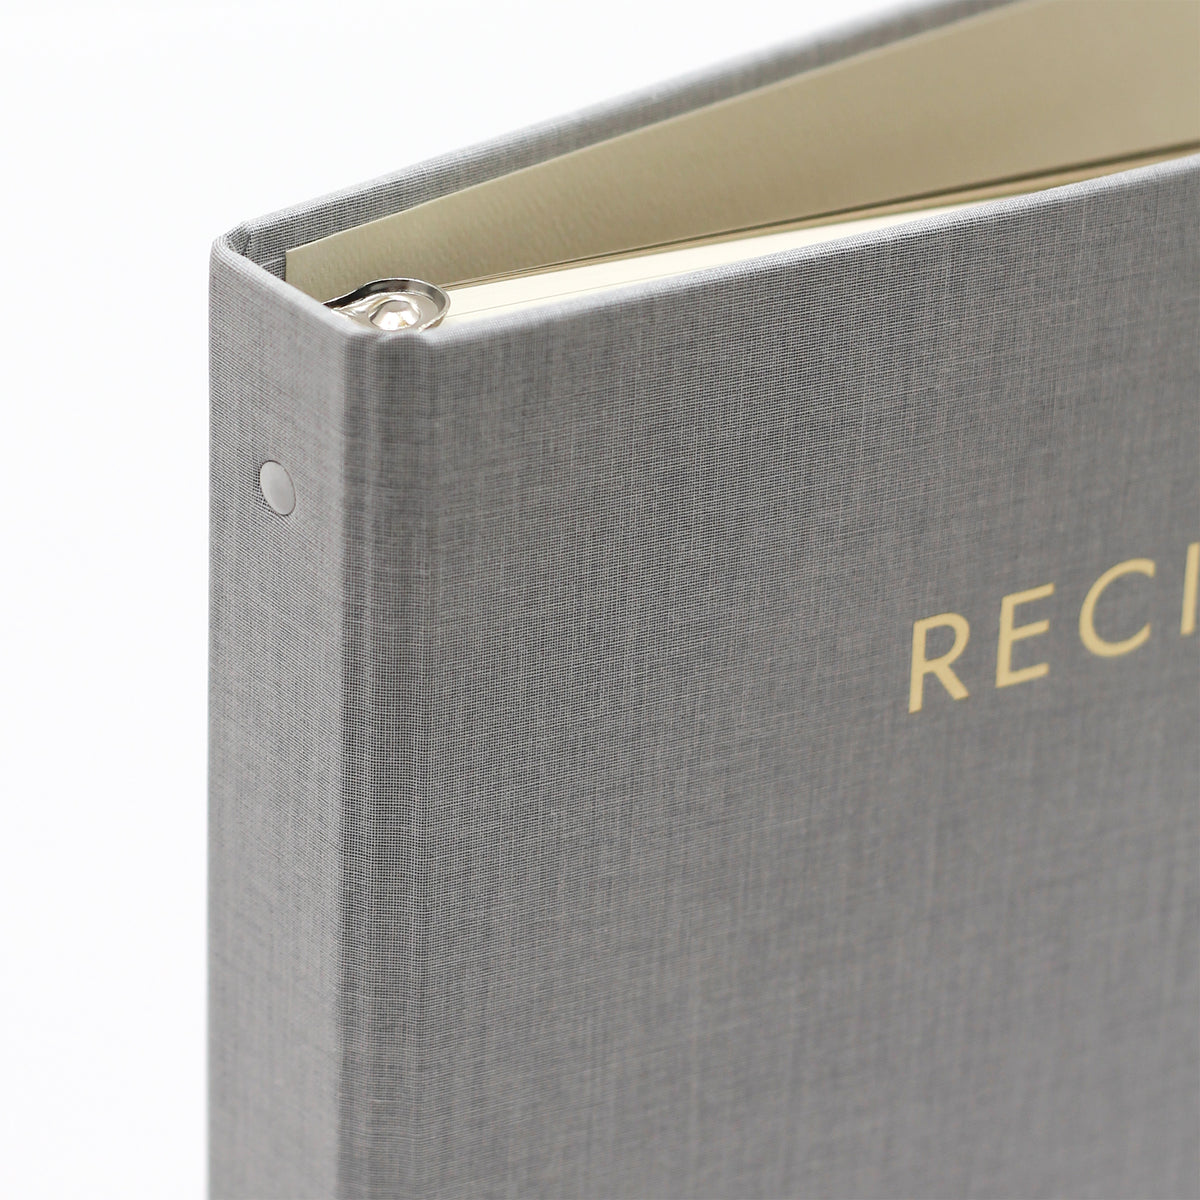 Recipe Journal Embossed with &quot;RECIPES&quot; covered with Dove Gray Linen